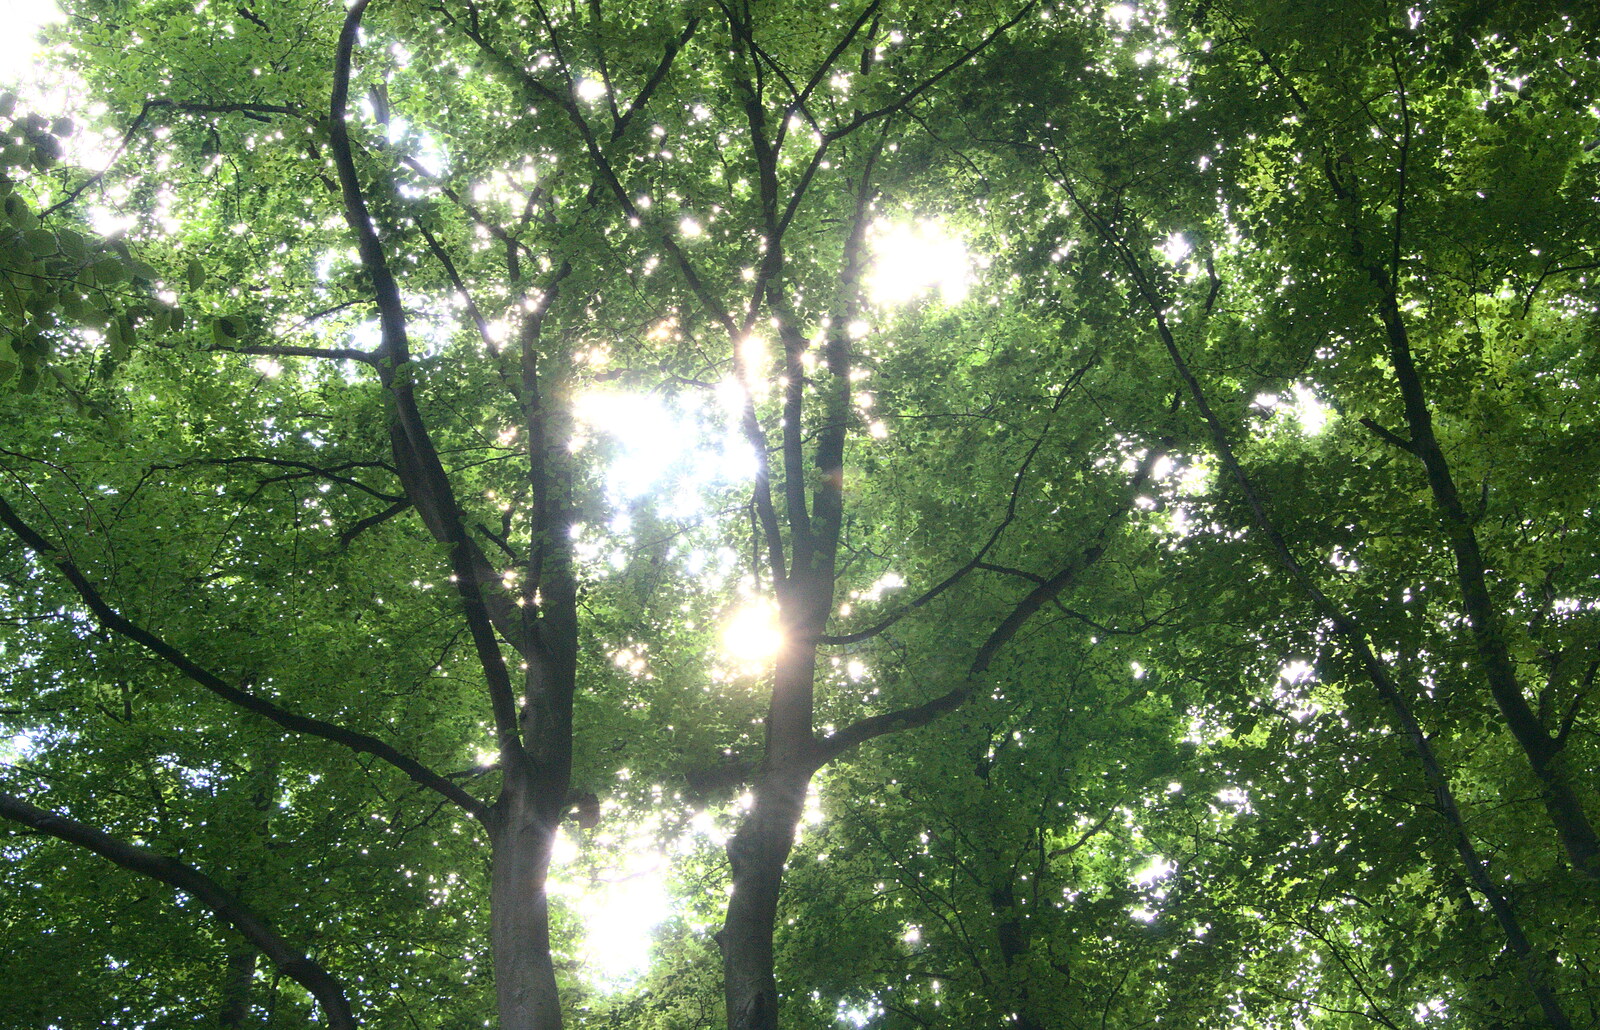 The sun breaks through the tree canopy from Camping at Dower House, West Harling, Norfolk - 1st July 2017